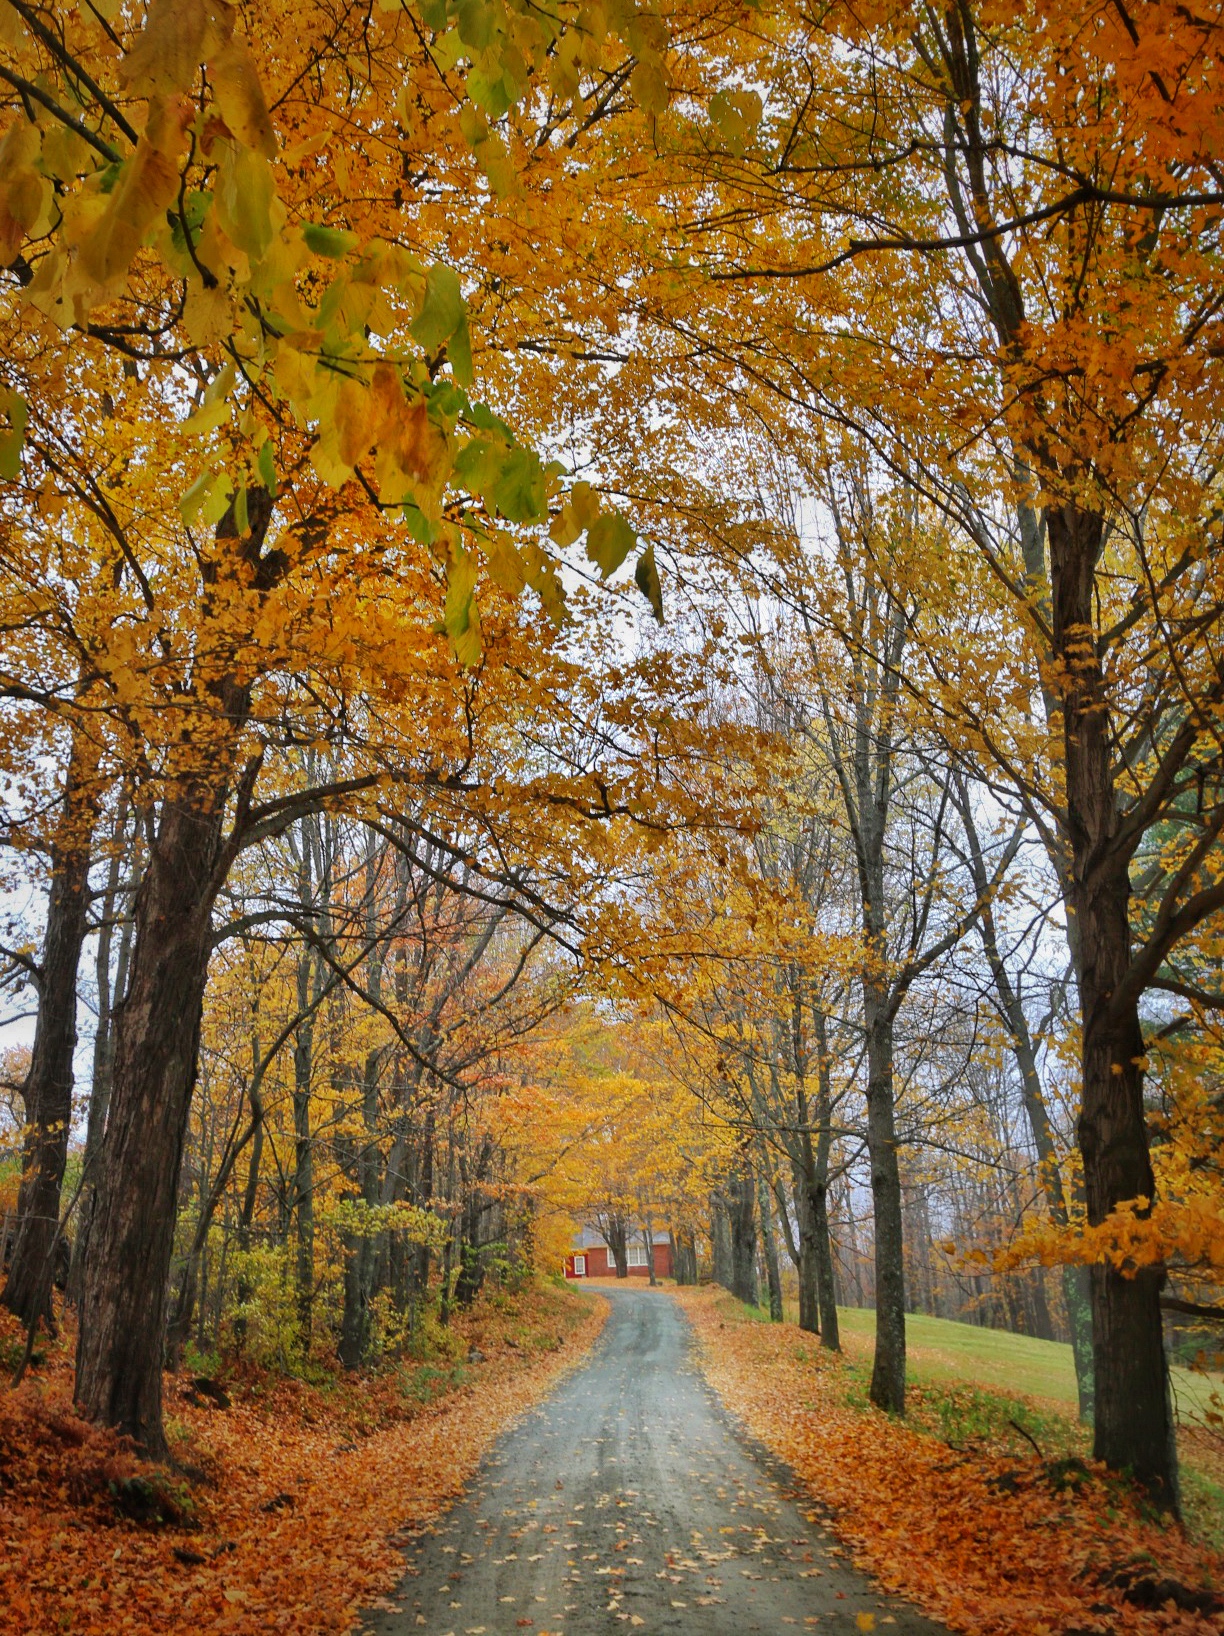 Things to Do in Autumn Vermont - Road Trip Photo Guide | Travel-Break.net